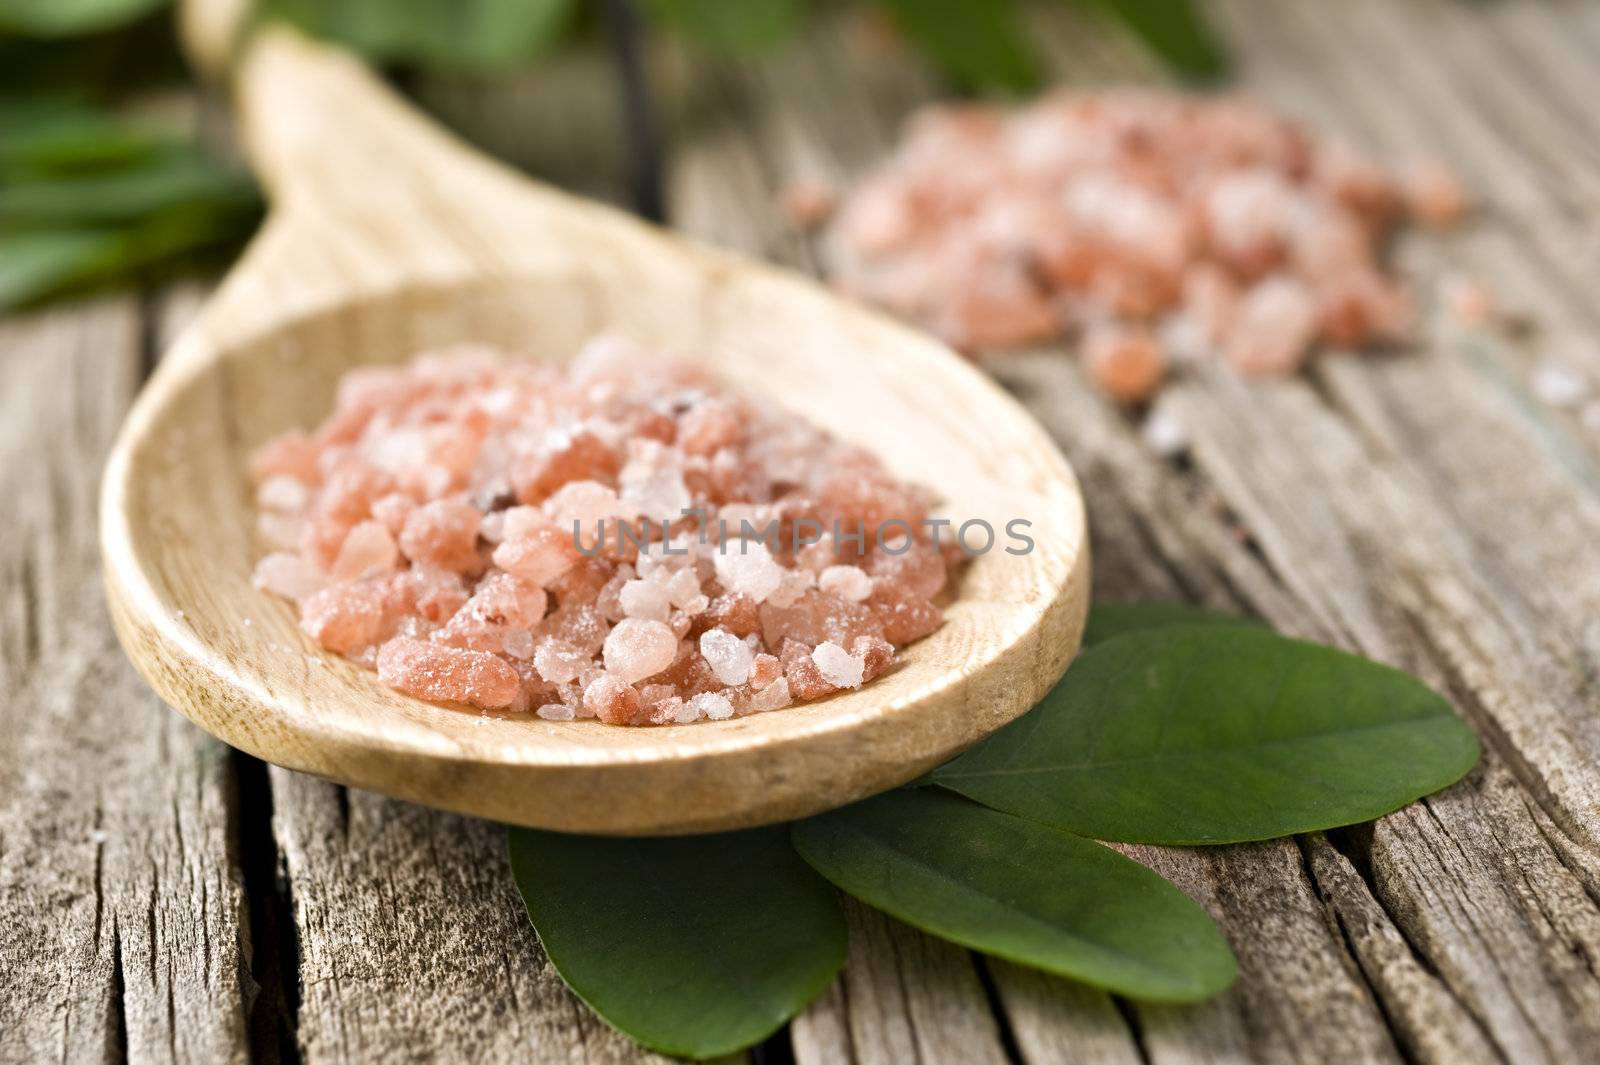 Course pink Himalayan salt on a wooden spoon by tish1